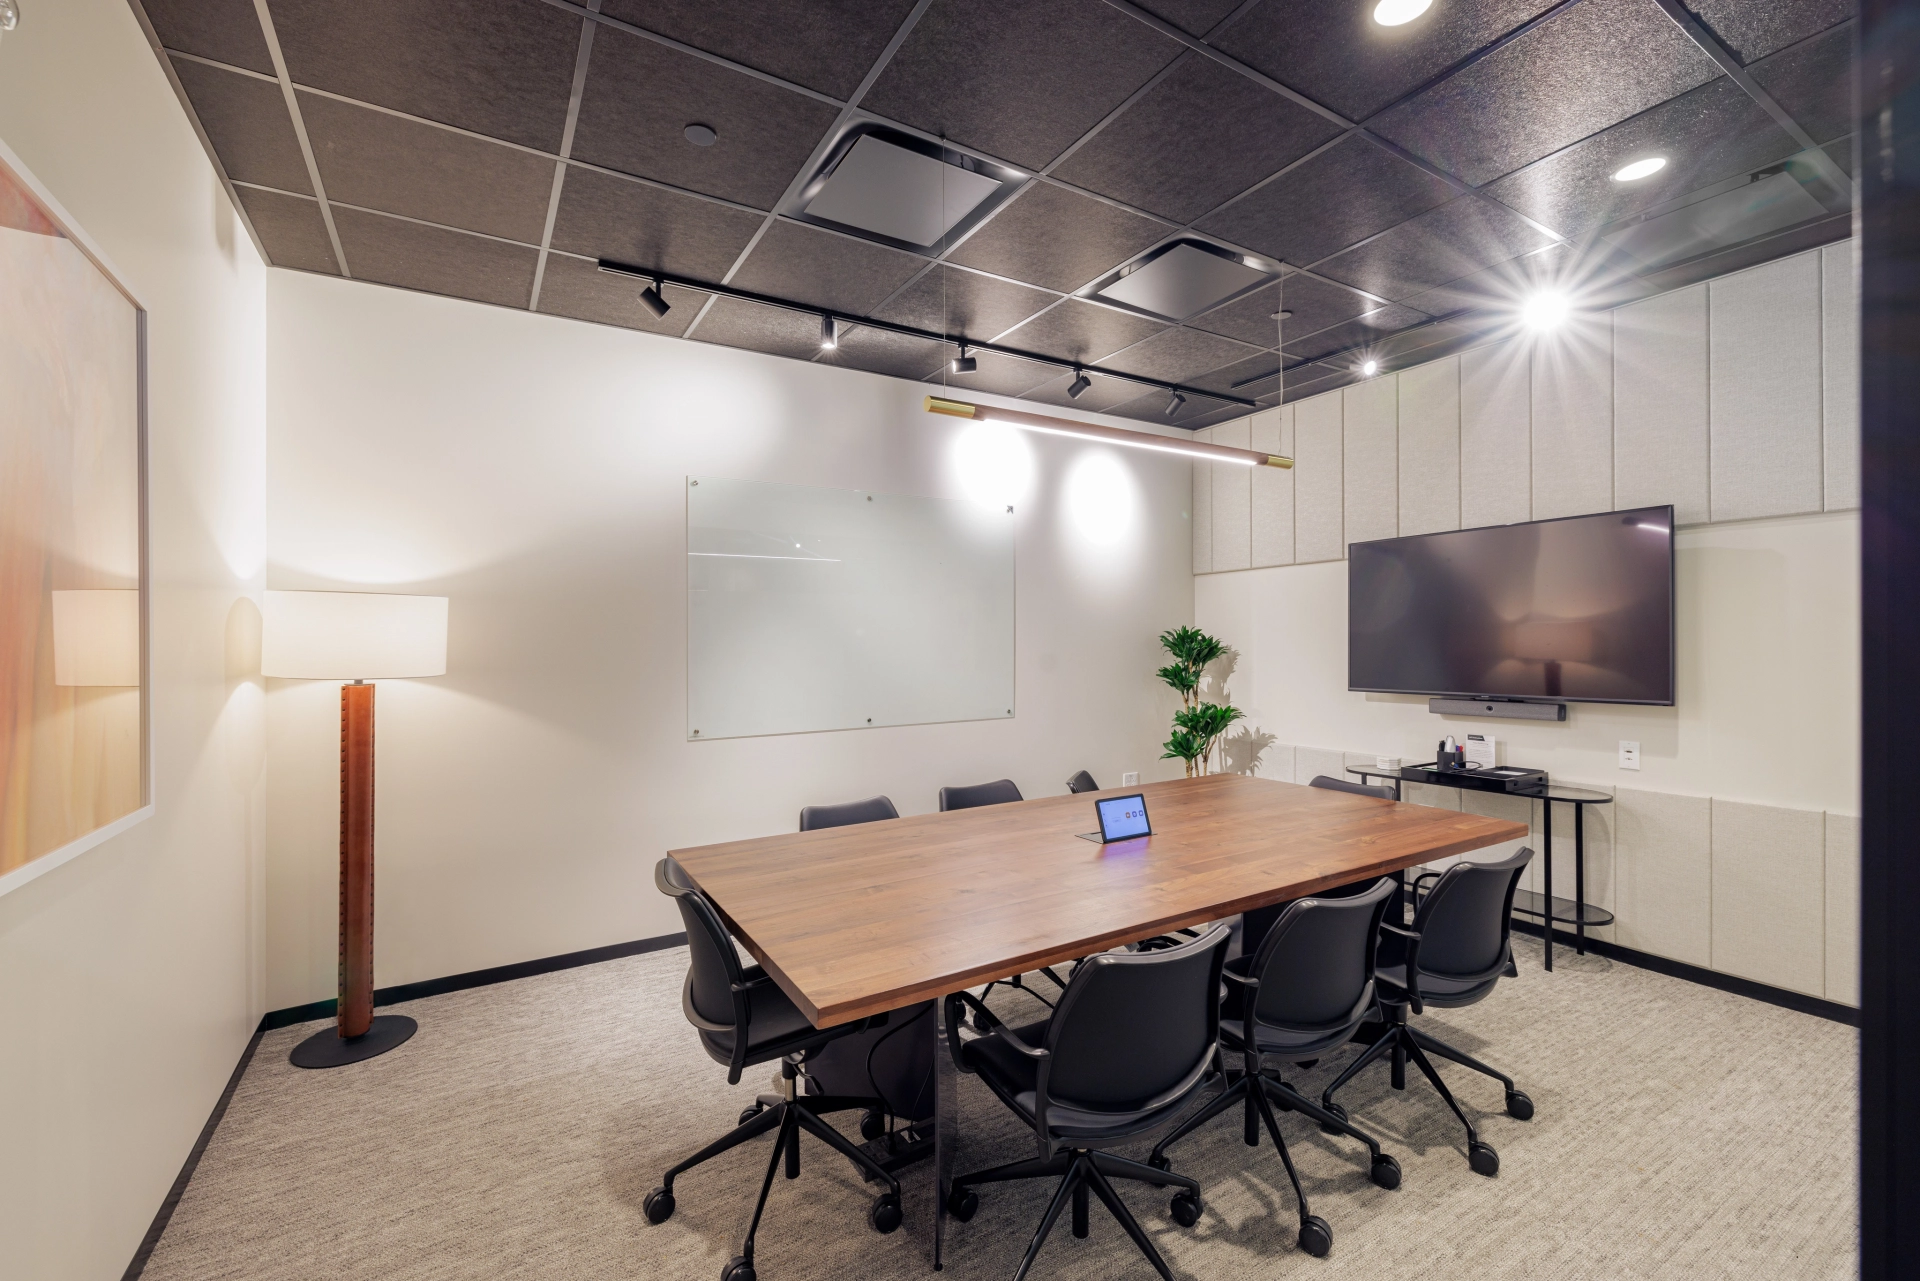 An office conference room in Palo Alto with a table and chairs, designed for productive workspace.